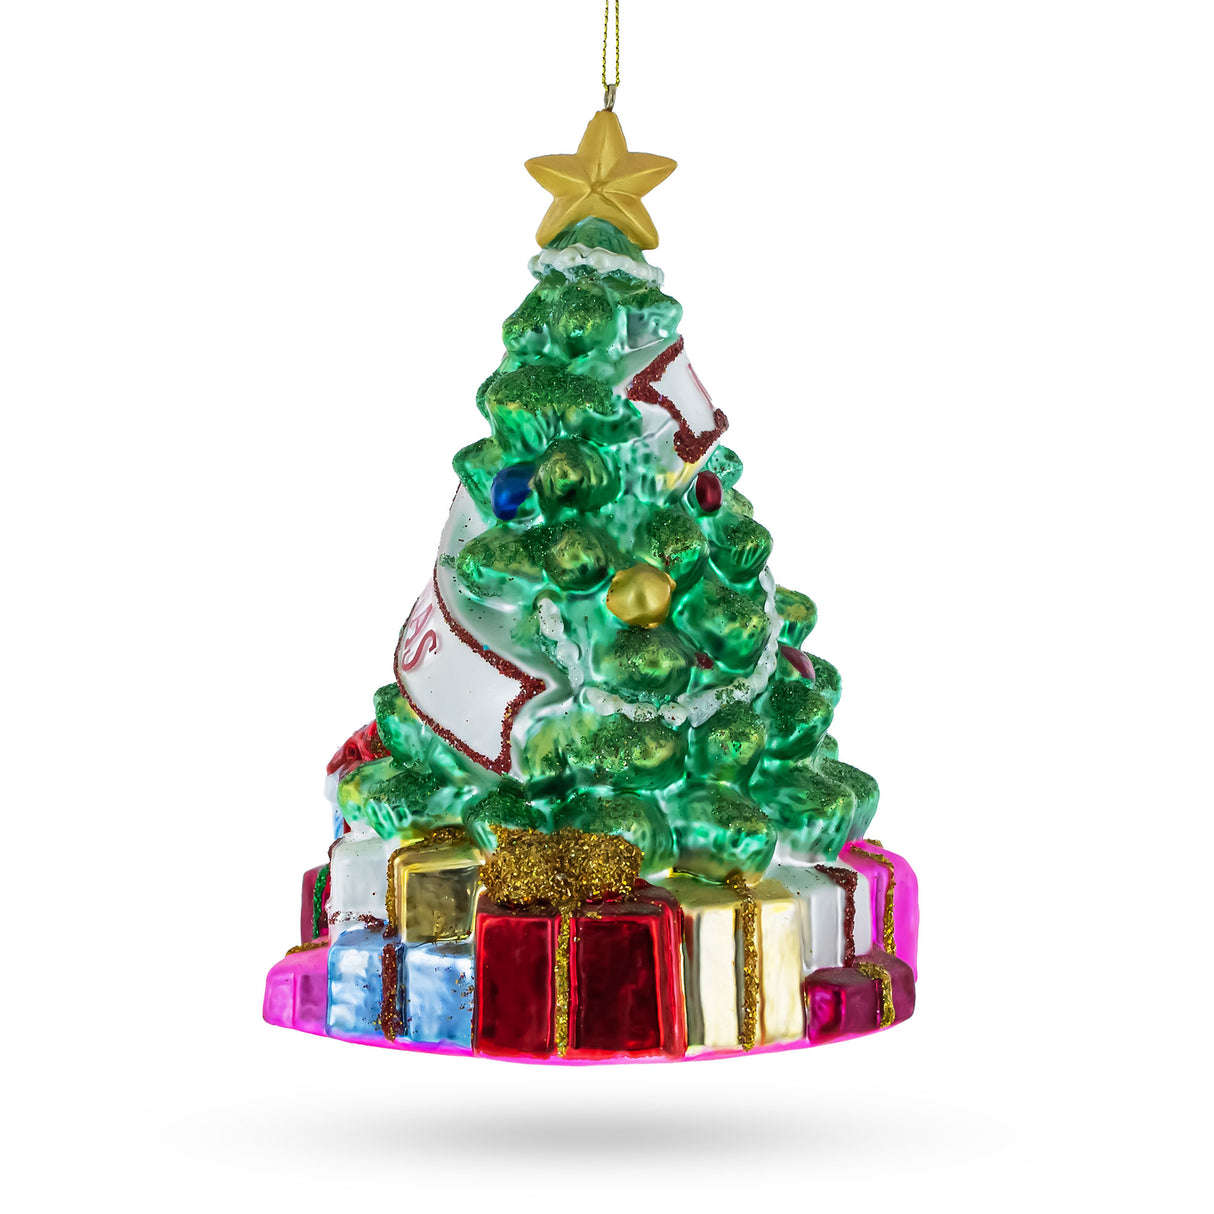 Festively Decorated Christmas Tree - Blown Glass Christmas Ornament ,dimensions in inches: 6.8 x 4.5 x 4.5